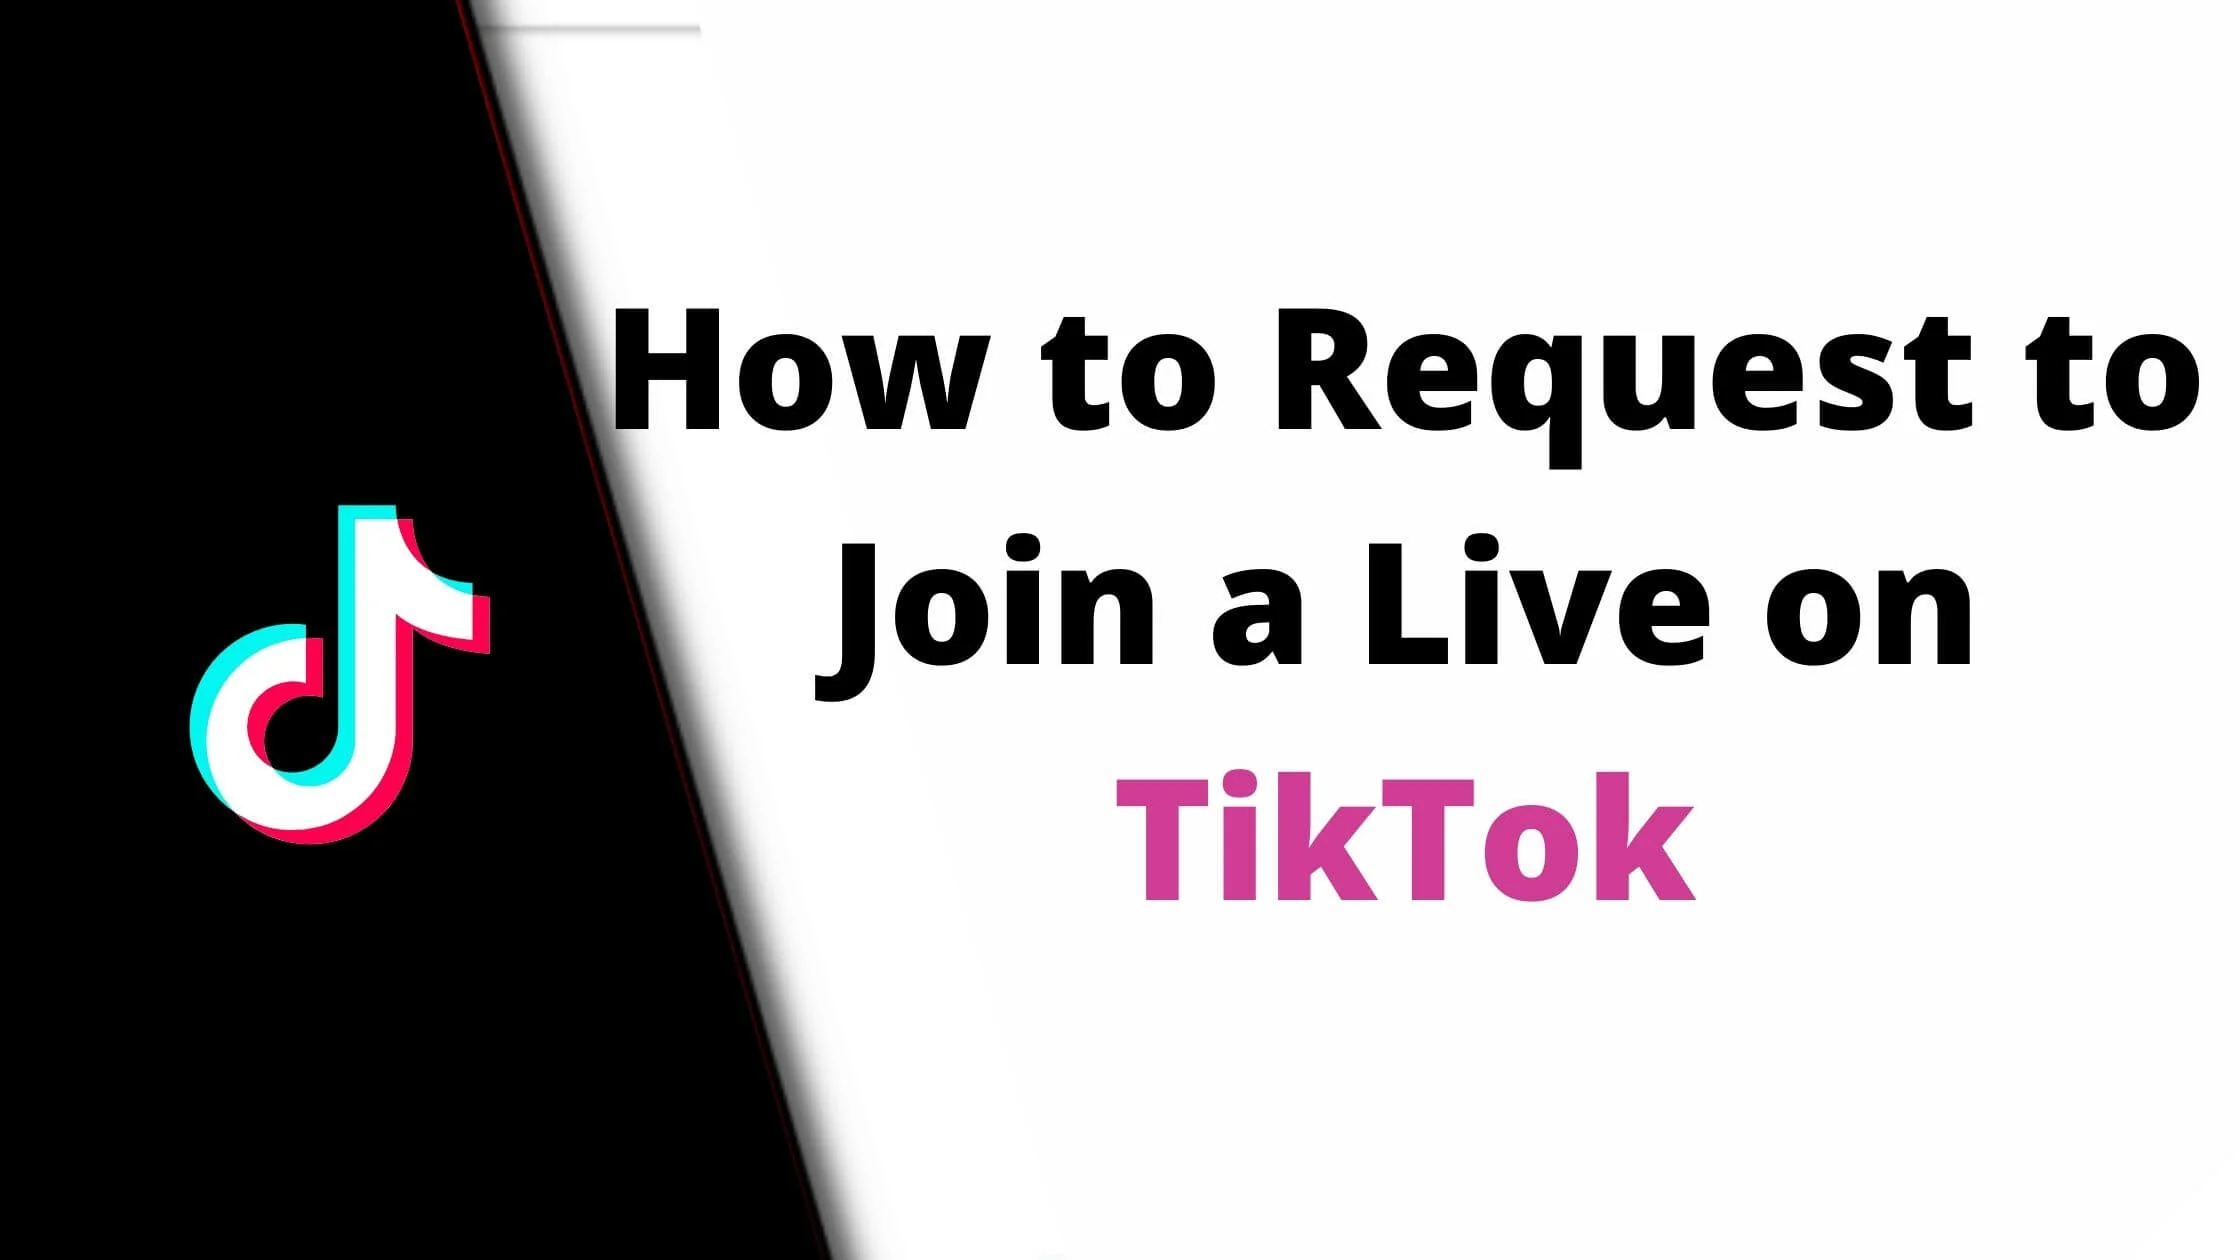 Request to Join a Live on TikTok